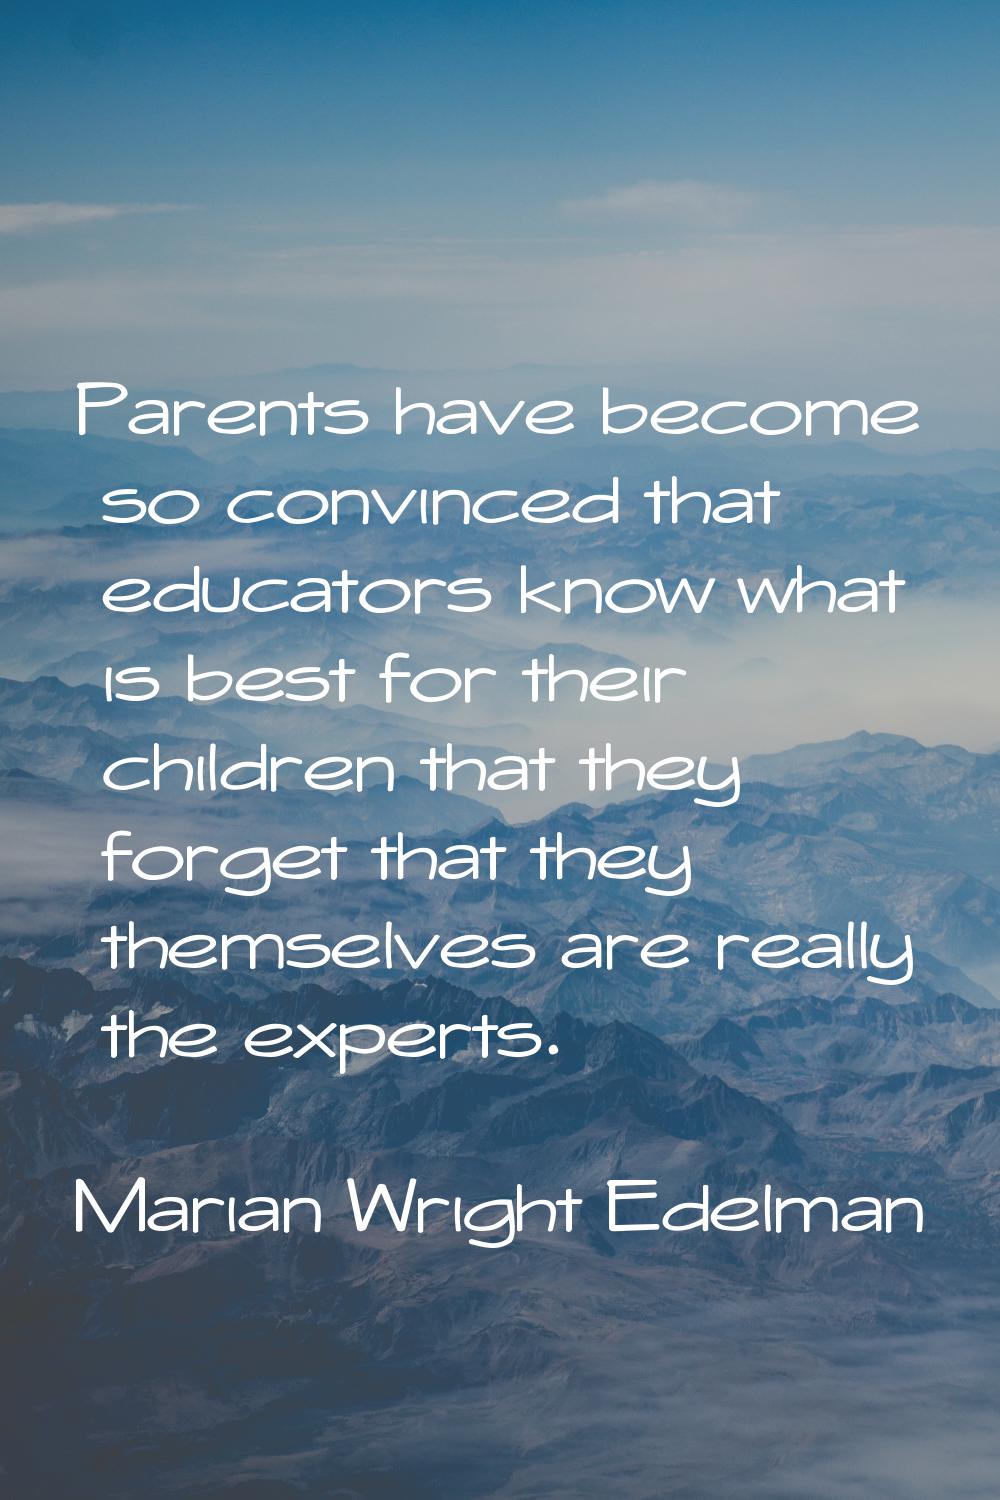 Parents have become so convinced that educators know what is best for their children that they forg